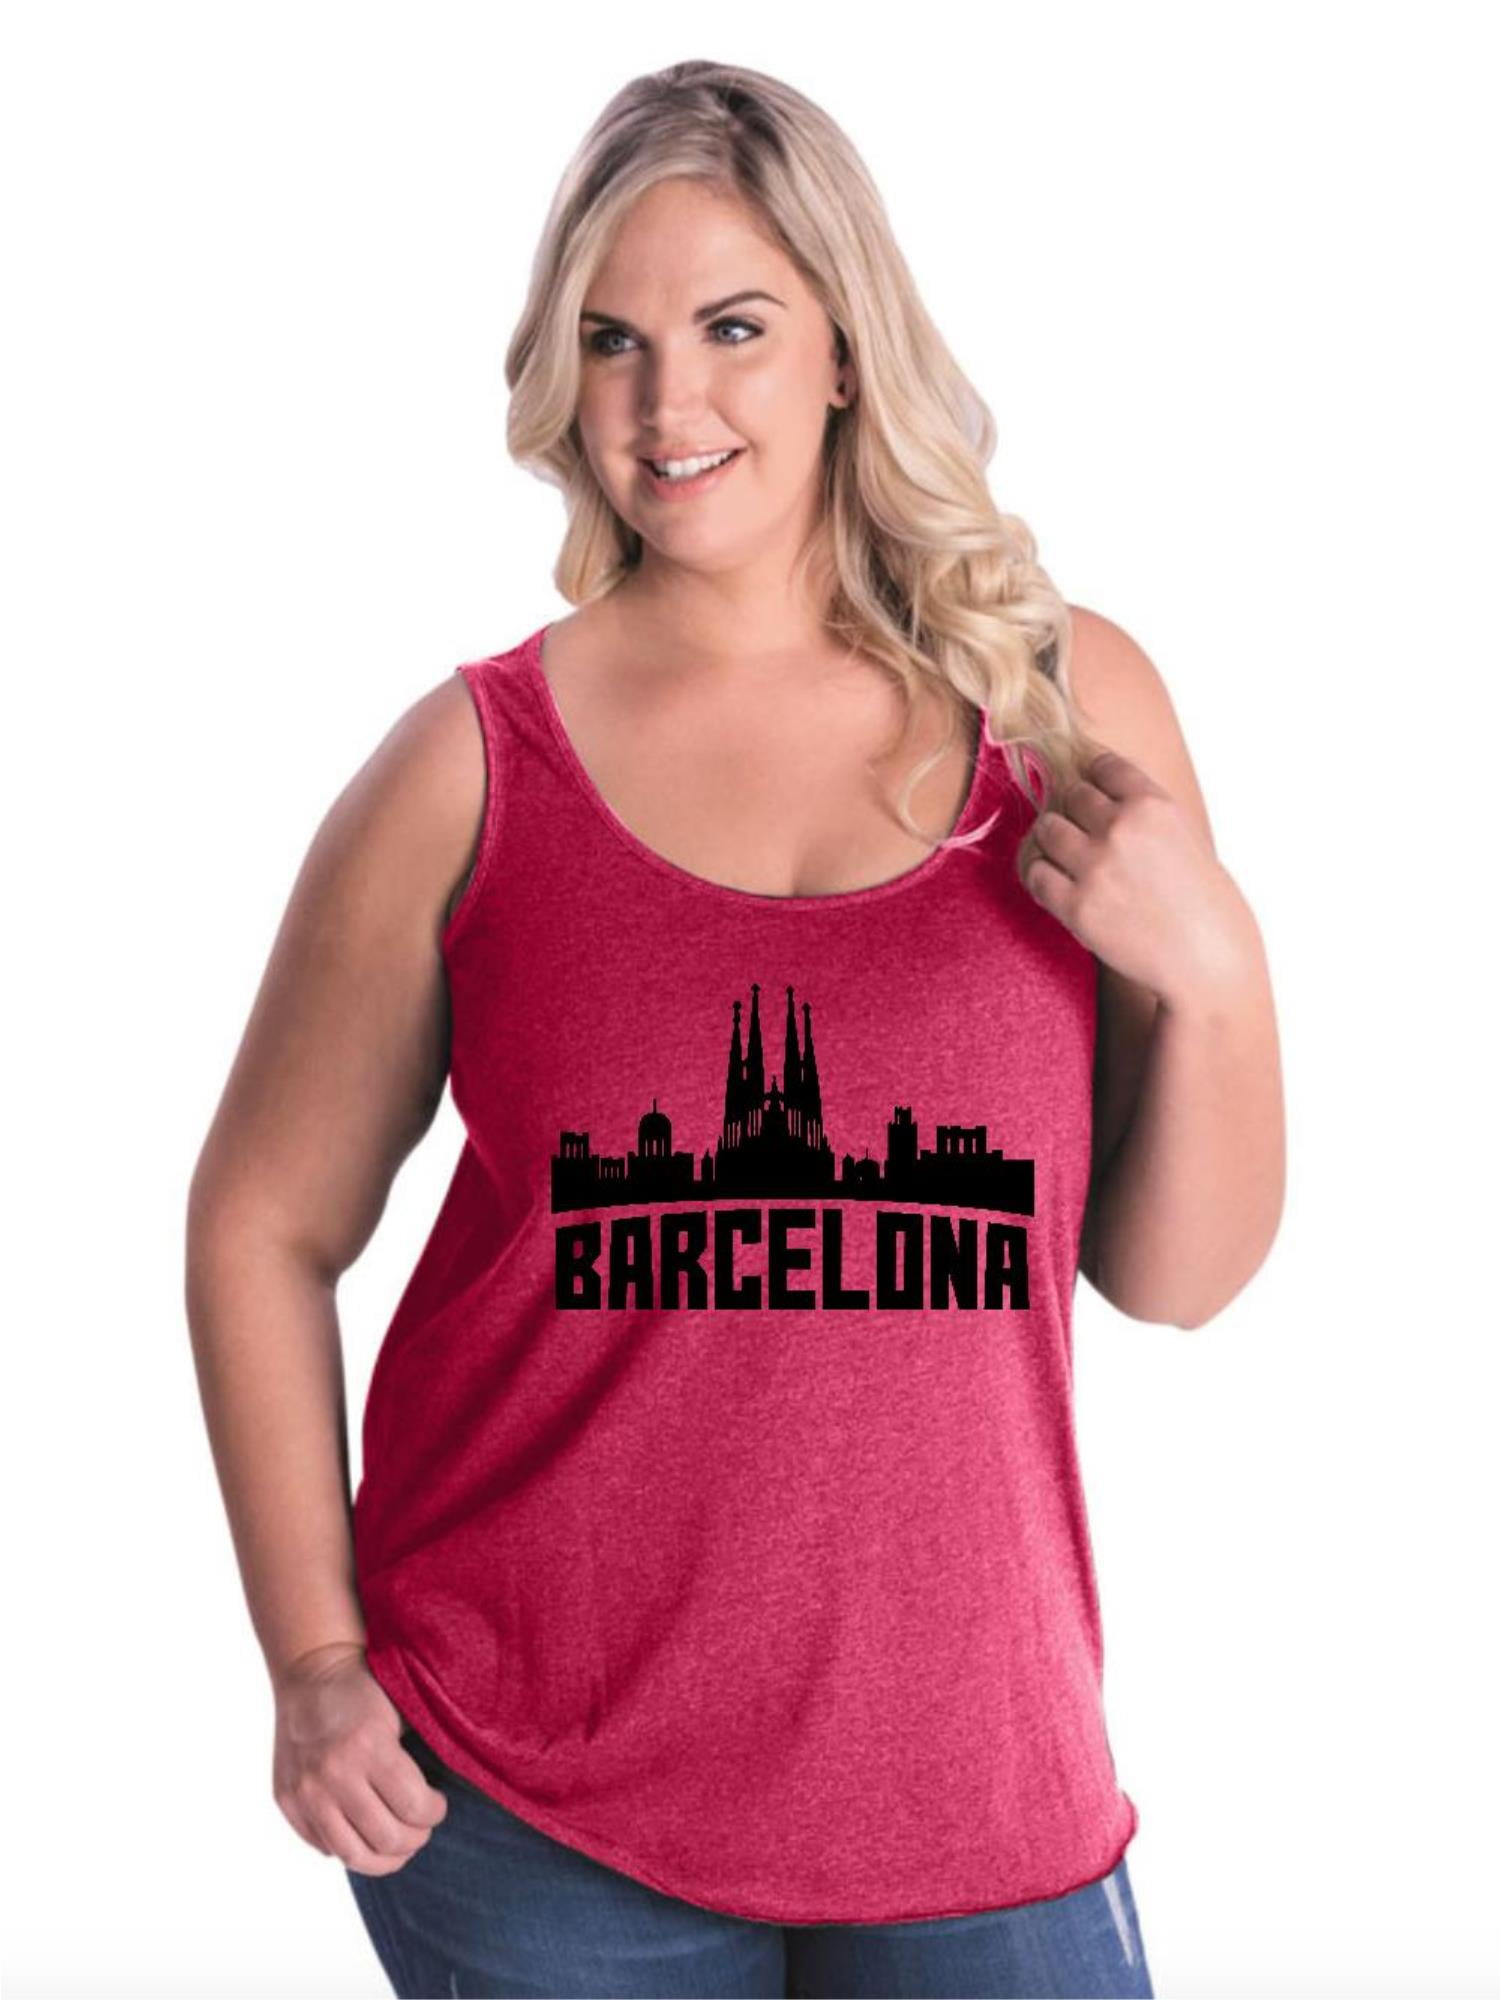 Normal is Boring - Women's Plus Size Tank Top, up to Size 28 ...